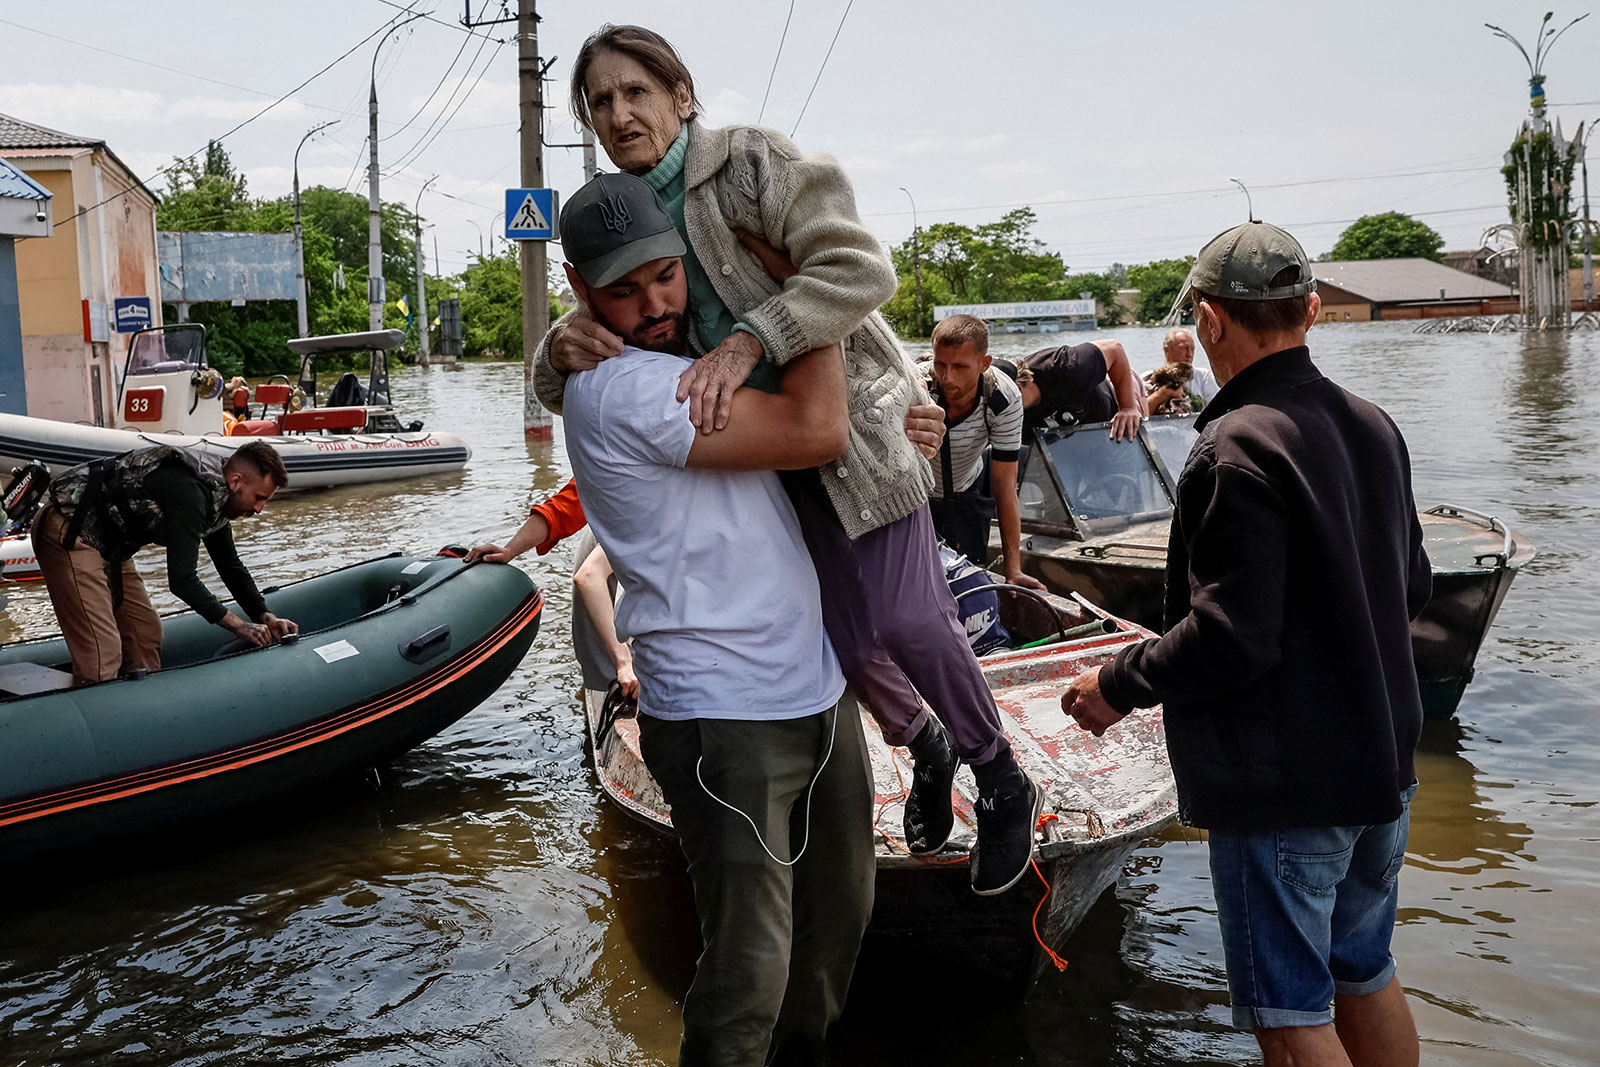 Volunteers evacuate local residents from a flooded area in Kherson, Ukraine on Thursday, June 8.